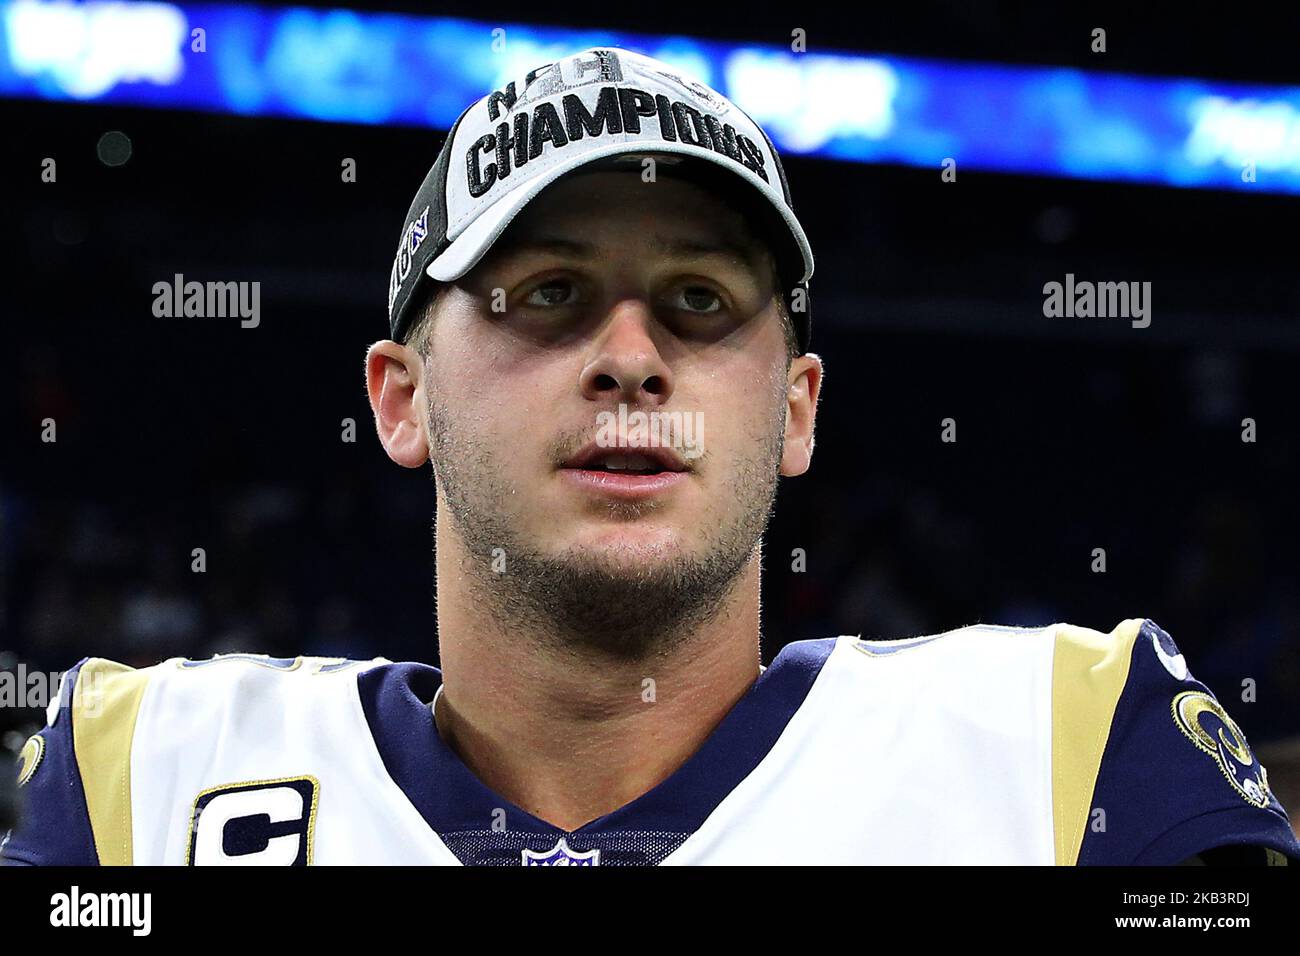 Los Angeles Rams quarterback Jared Goff (16) wears an NFC Champions hat after clinching the NFC championship with a win over the Detroit during the second half of an NFL football game against the Los Angeles Rams in Detroit, Michigan USA, on Sunday, December 2, 2018. (Photo by Amy Lemus/NurPhoto) Stock Photo